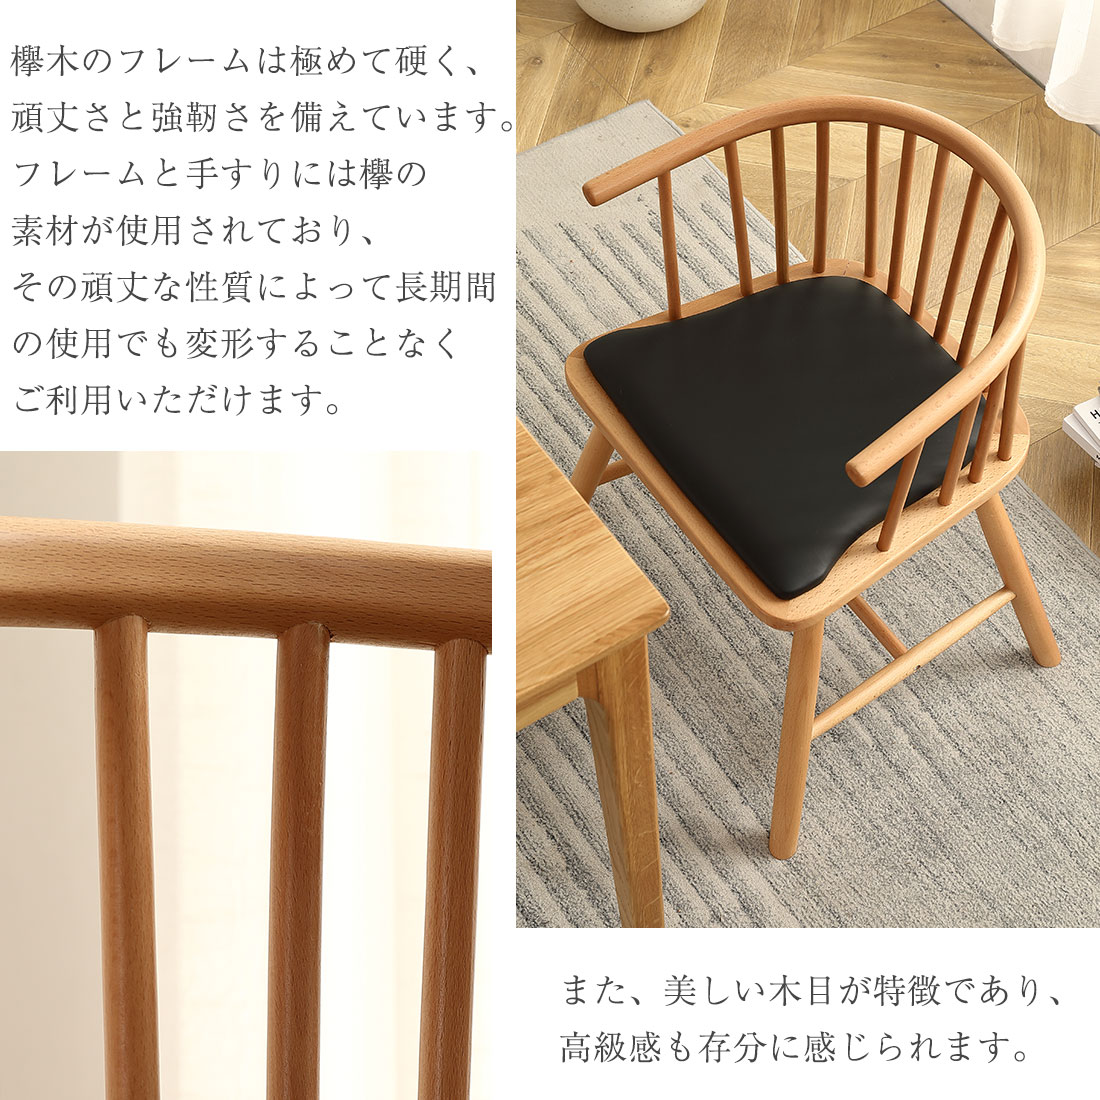 [ all goods 5%OFF* today limit ] limitation sale dining chair natural tree 1 legs wooden stylish .. sause PU bearing surface chair living retro modern popular Northern Europe natural laba